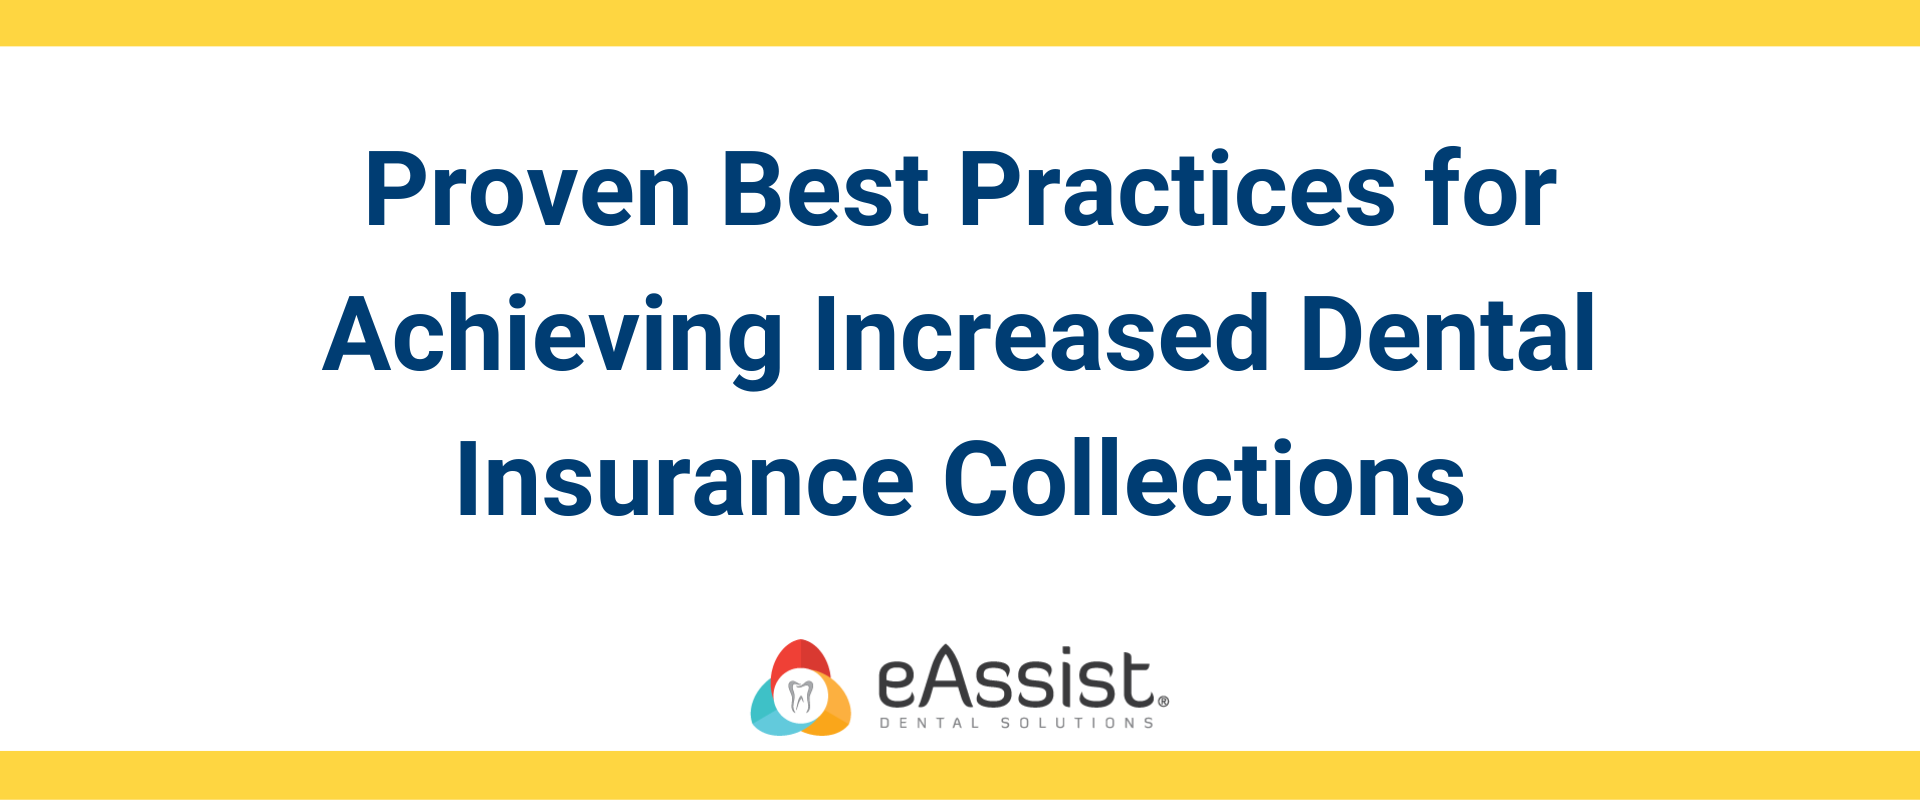 Proven Best Practices for Achieving Increased Dental Insurance Collections